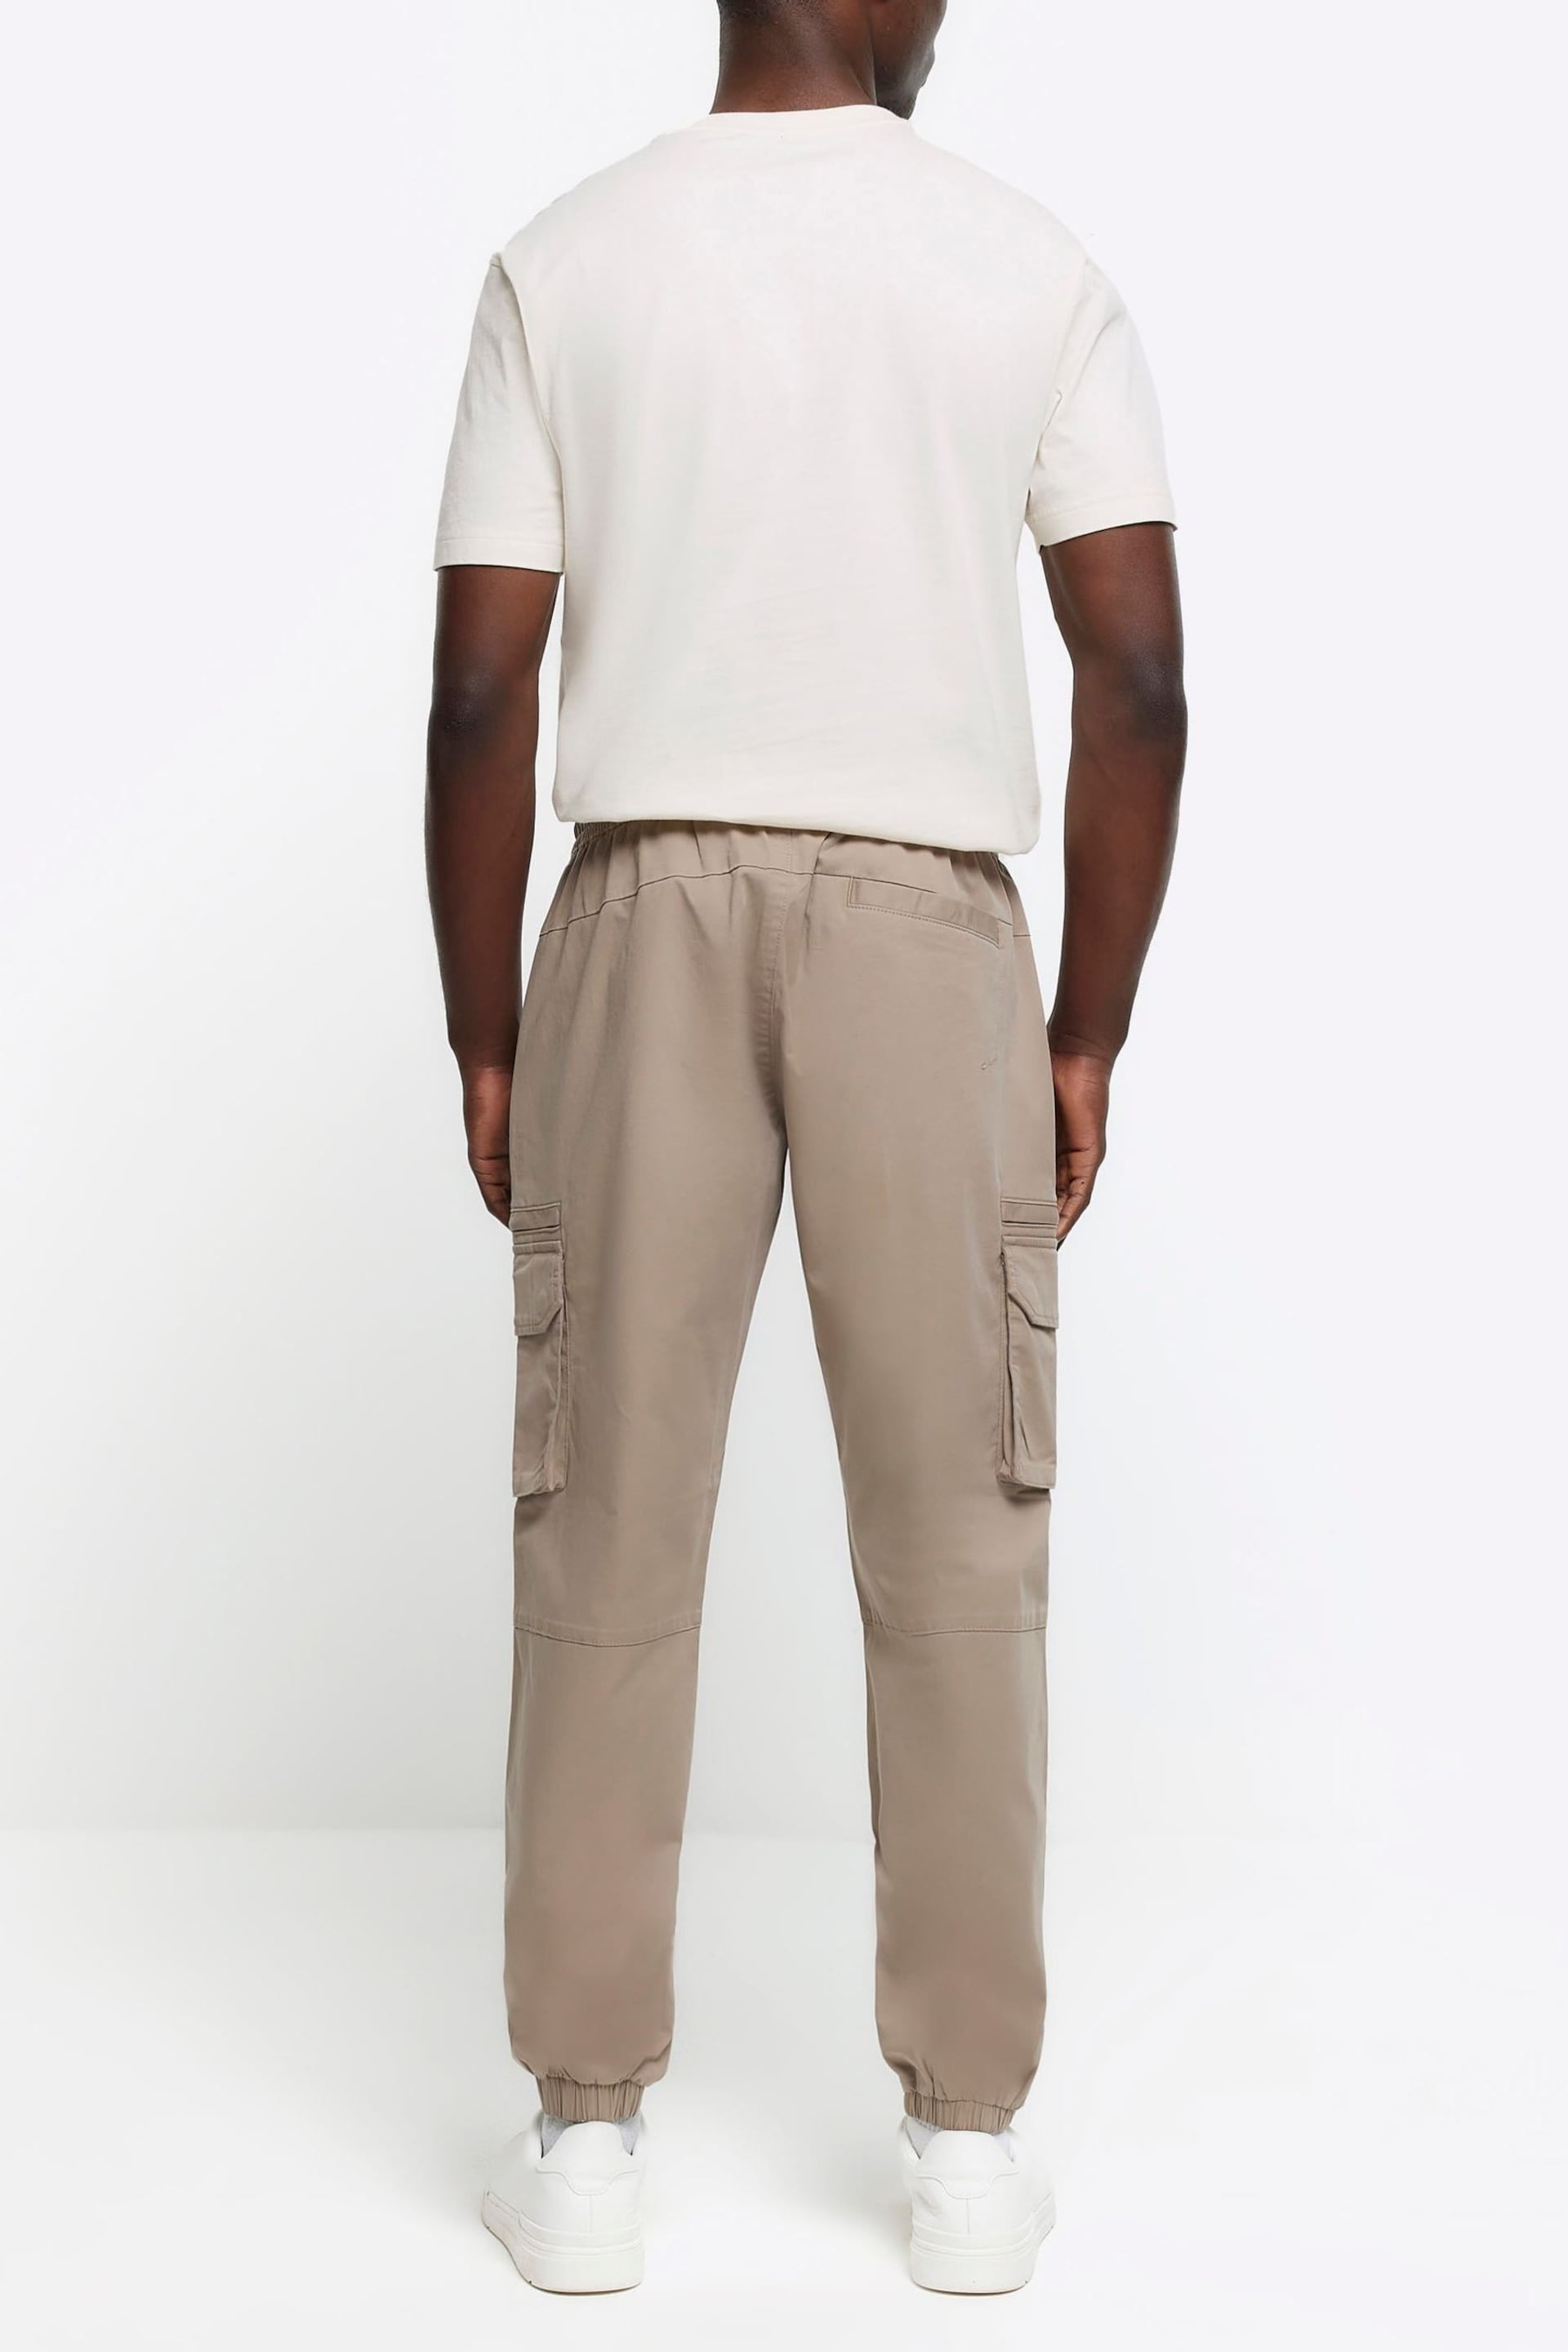 River Island Natural Elasticated Cargo Trousers - Image 3 of 4